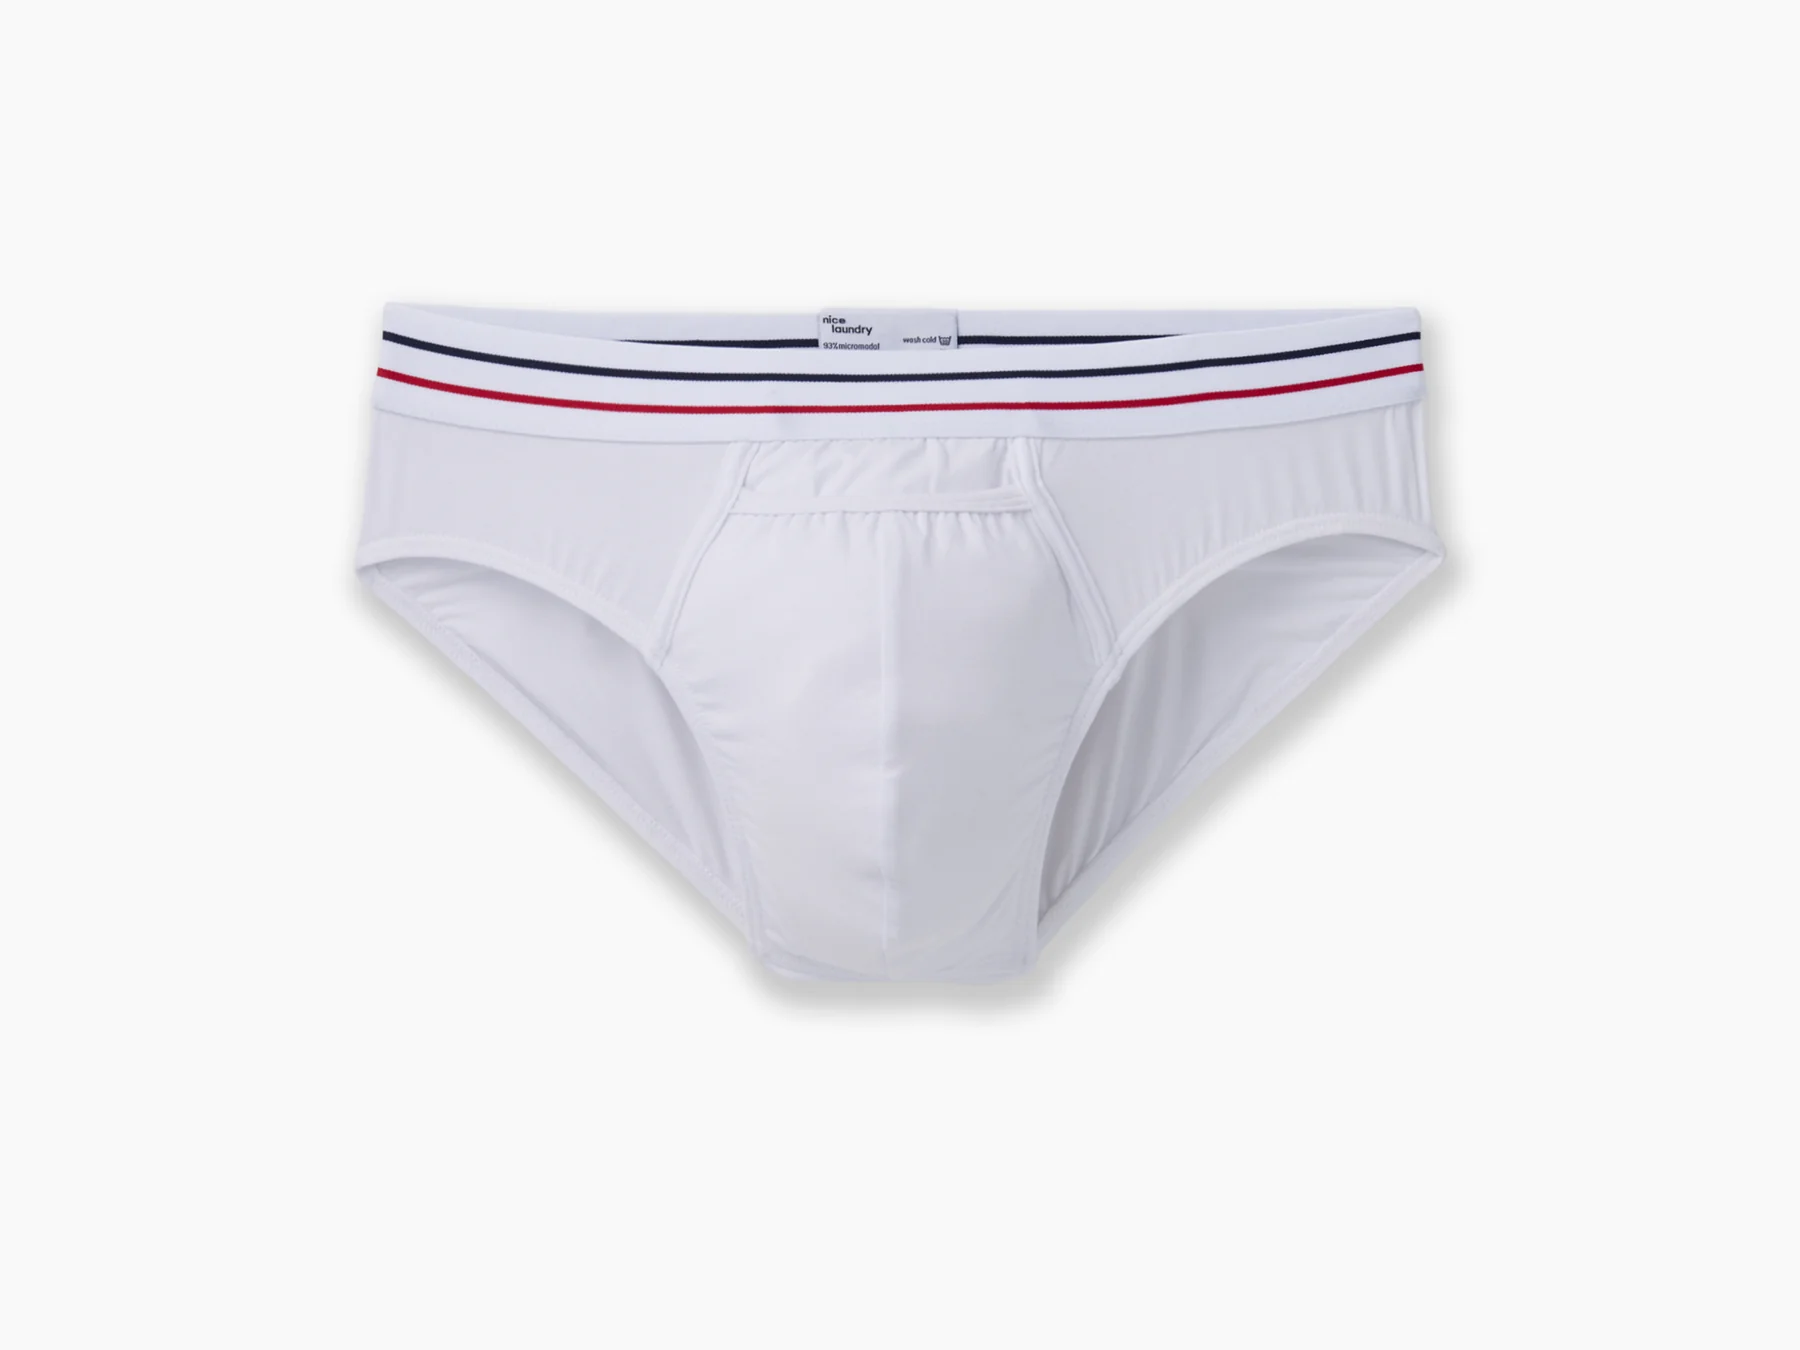 Tighty Whities Tuesday – Nice Laundry – Underwear News Briefs